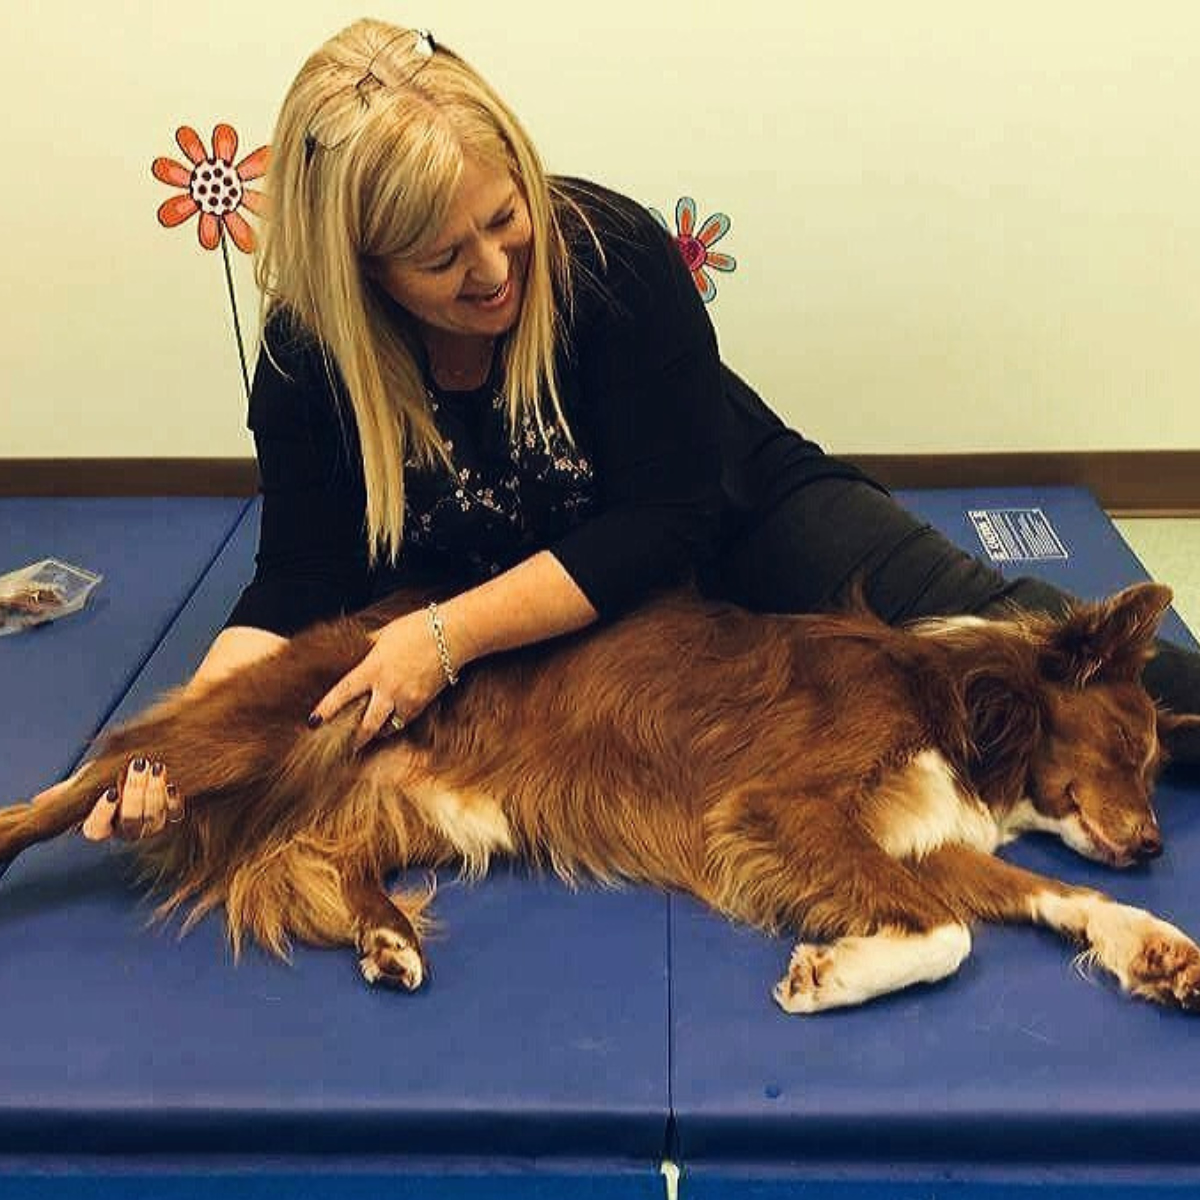 A woman with blonde hair sitting on the ground performing physical therapy on a brown, long-haired dog